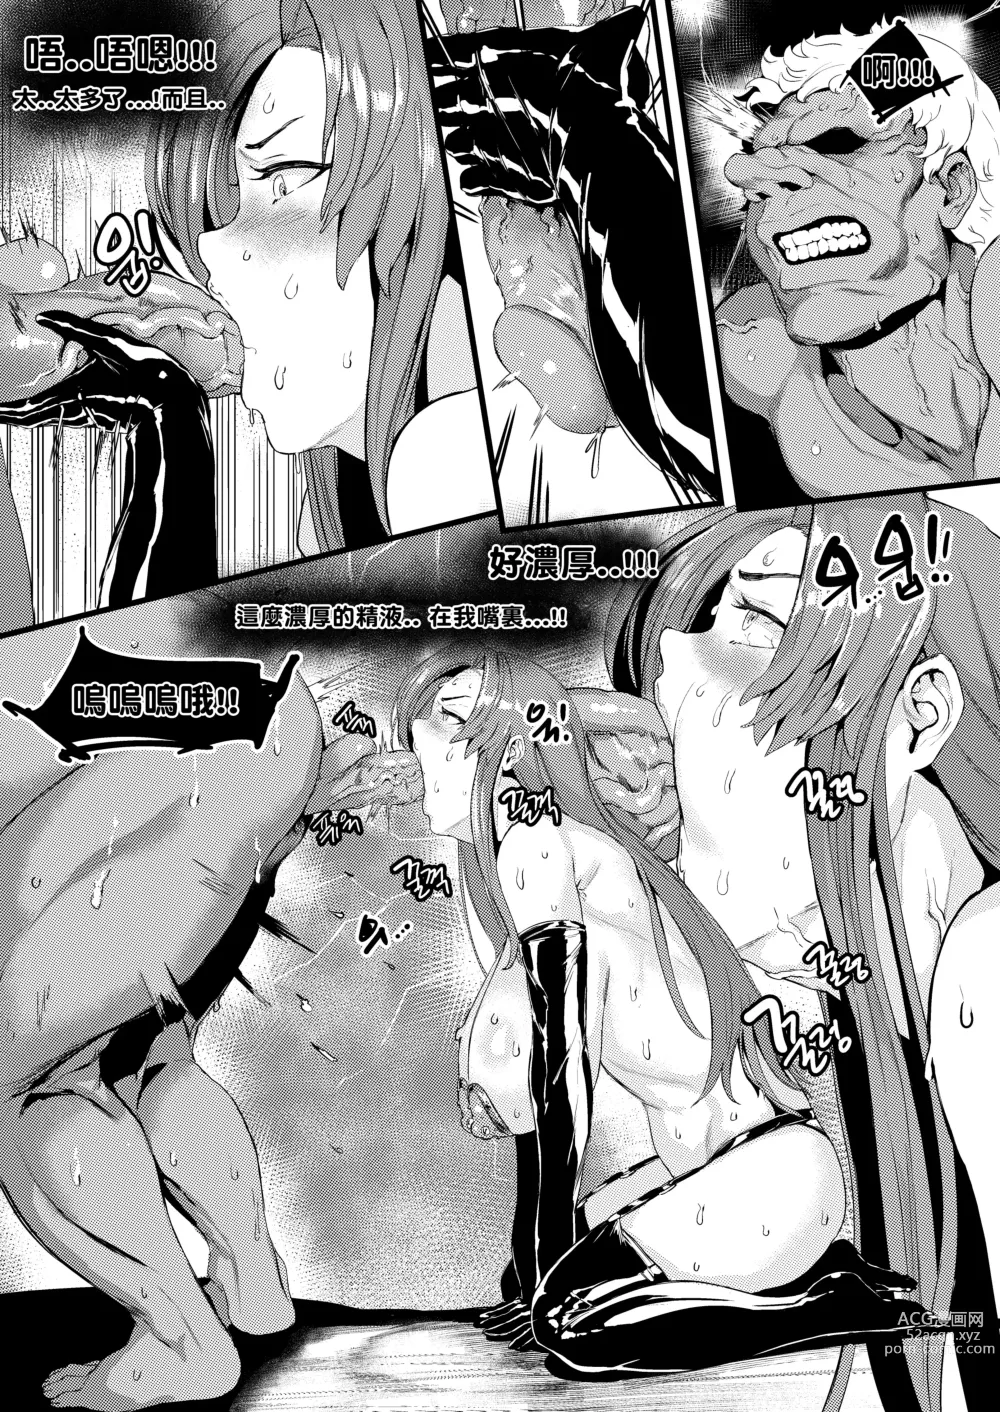 Page 15 of doujinshi mtr comission